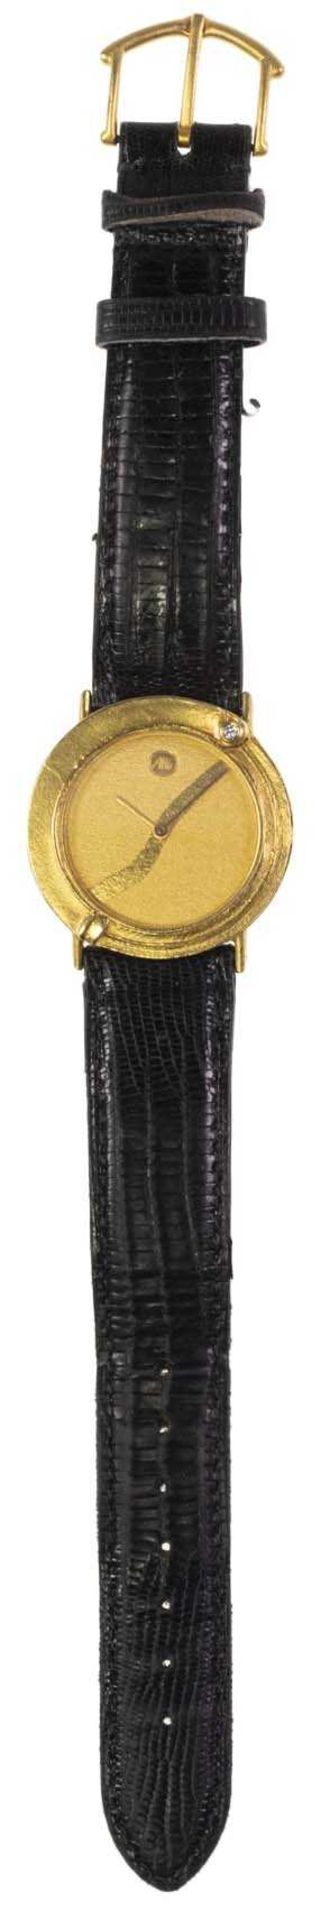 ARS designers gold watch. 750er Gold, as highlight a diamond in the mount, quartz movement, with lea